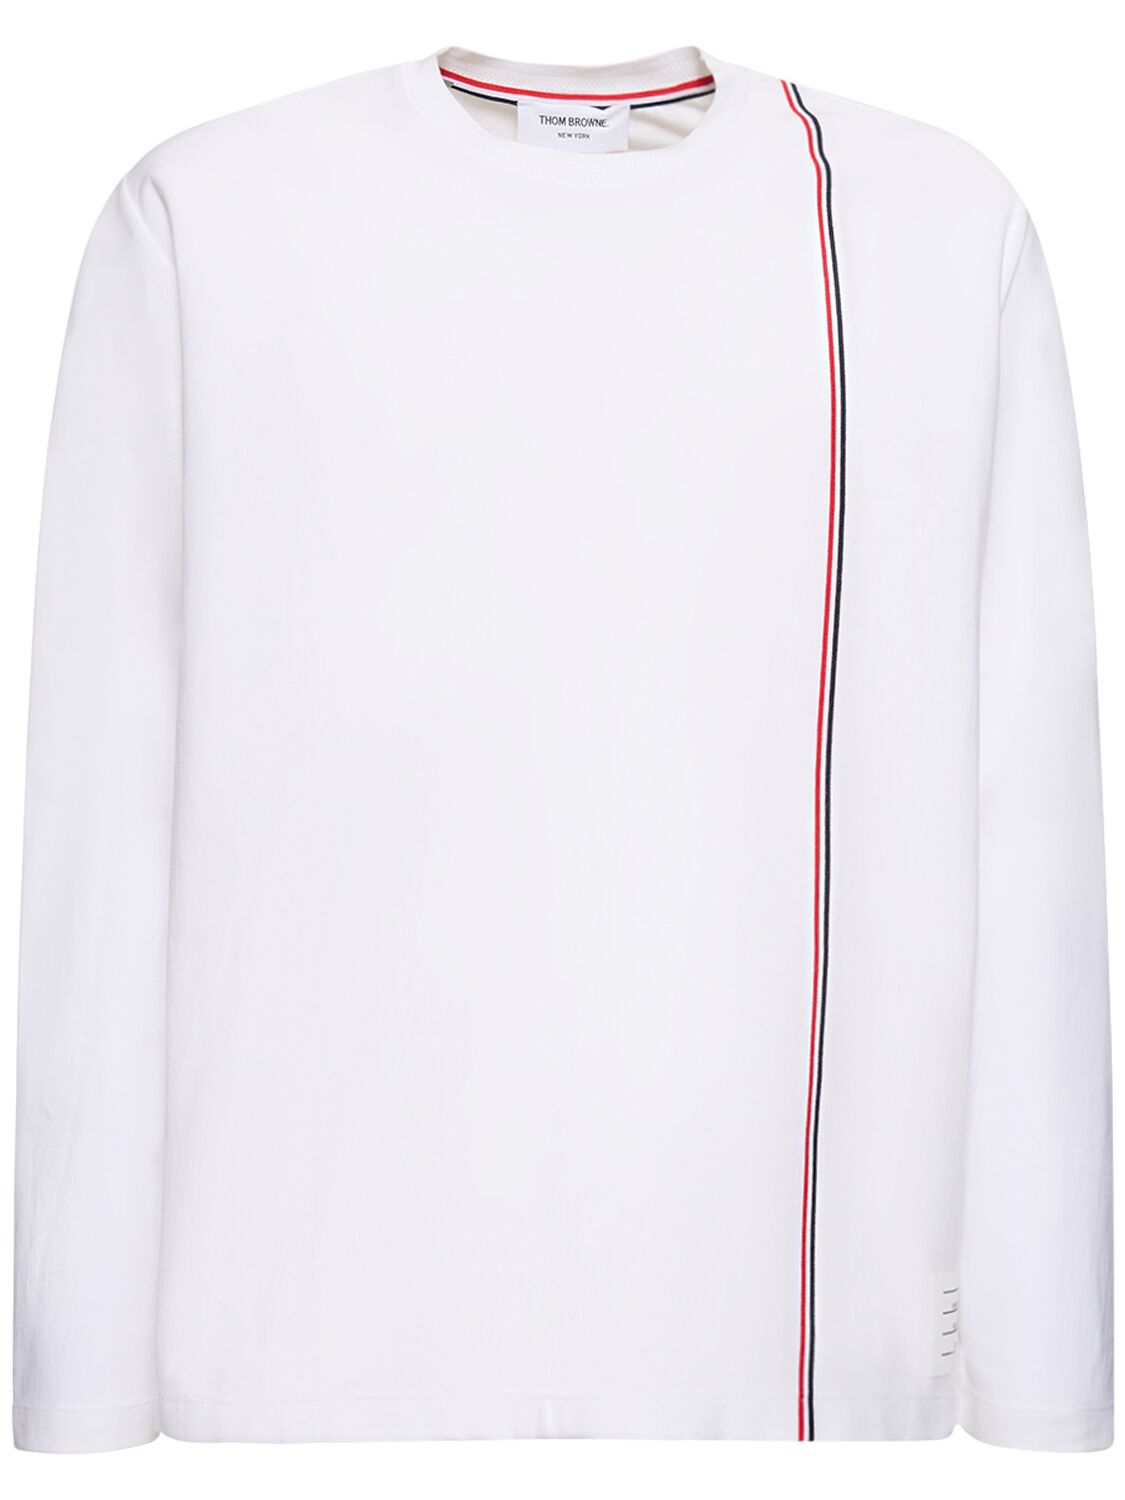 Thom Browne Oversize Cotton L/s Shirt In White